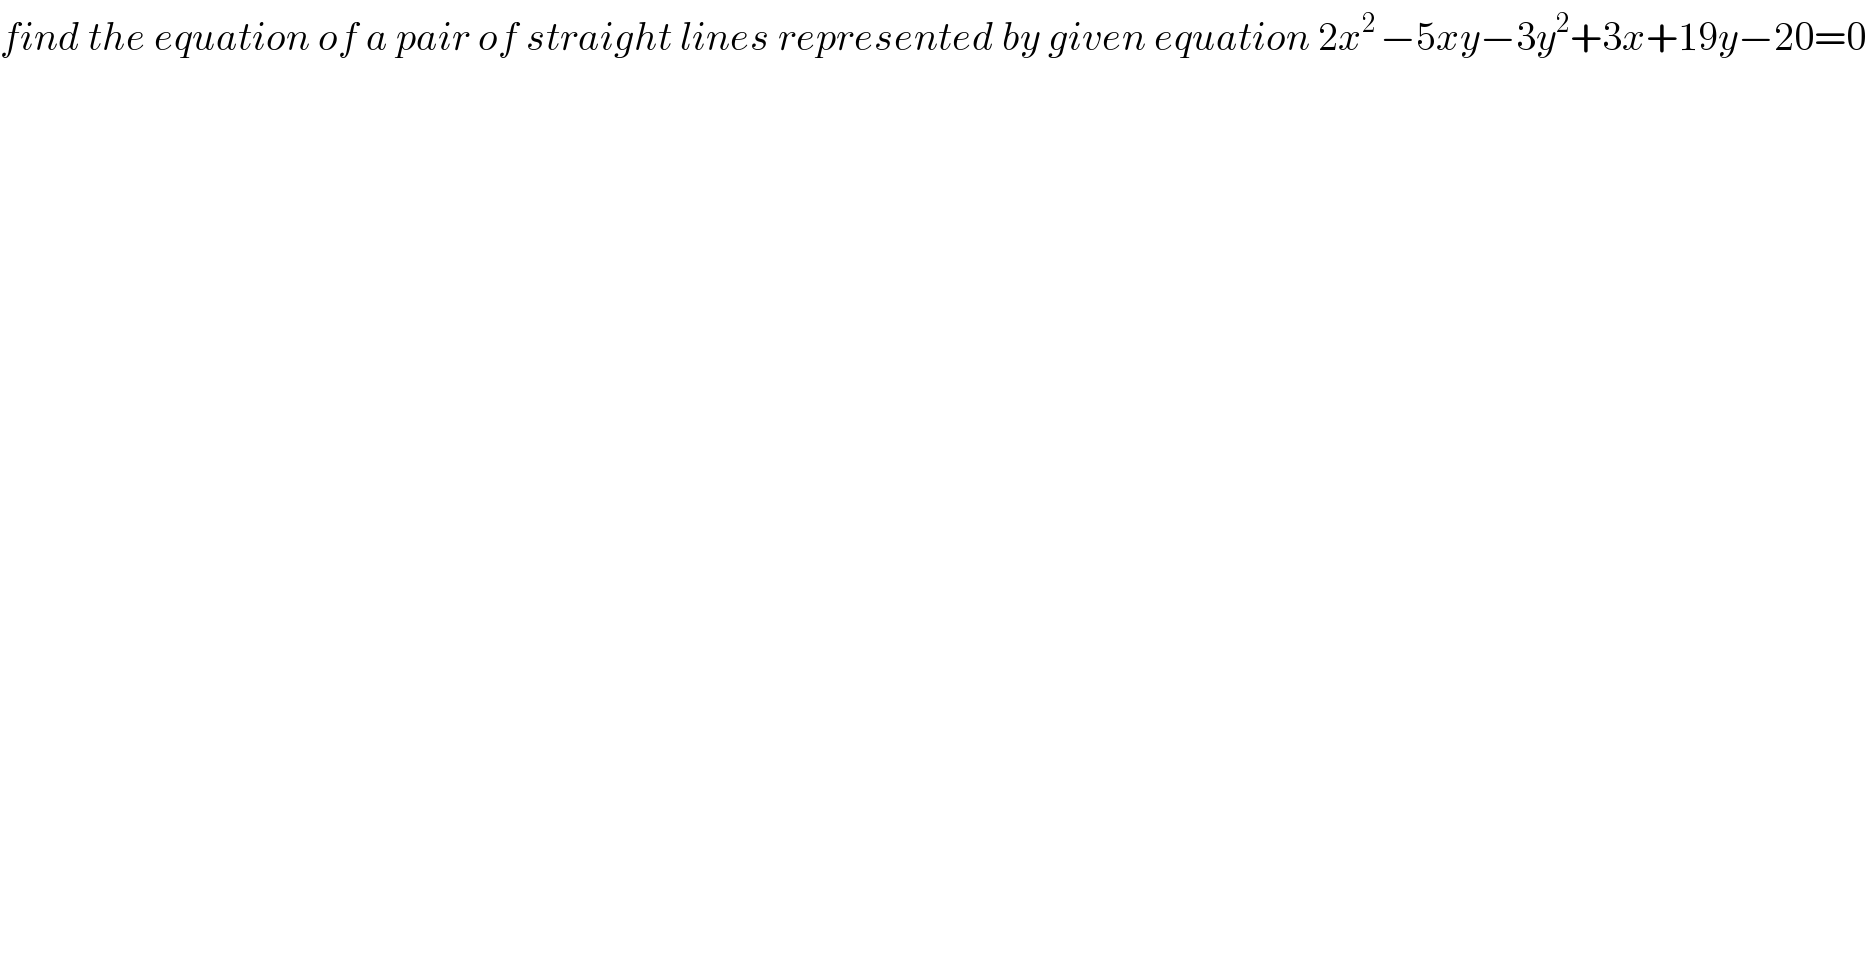 find the equation of a pair of straight lines represented by given equation 2x^(2 ) −5xy−3y^2 +3x+19y−20=0  